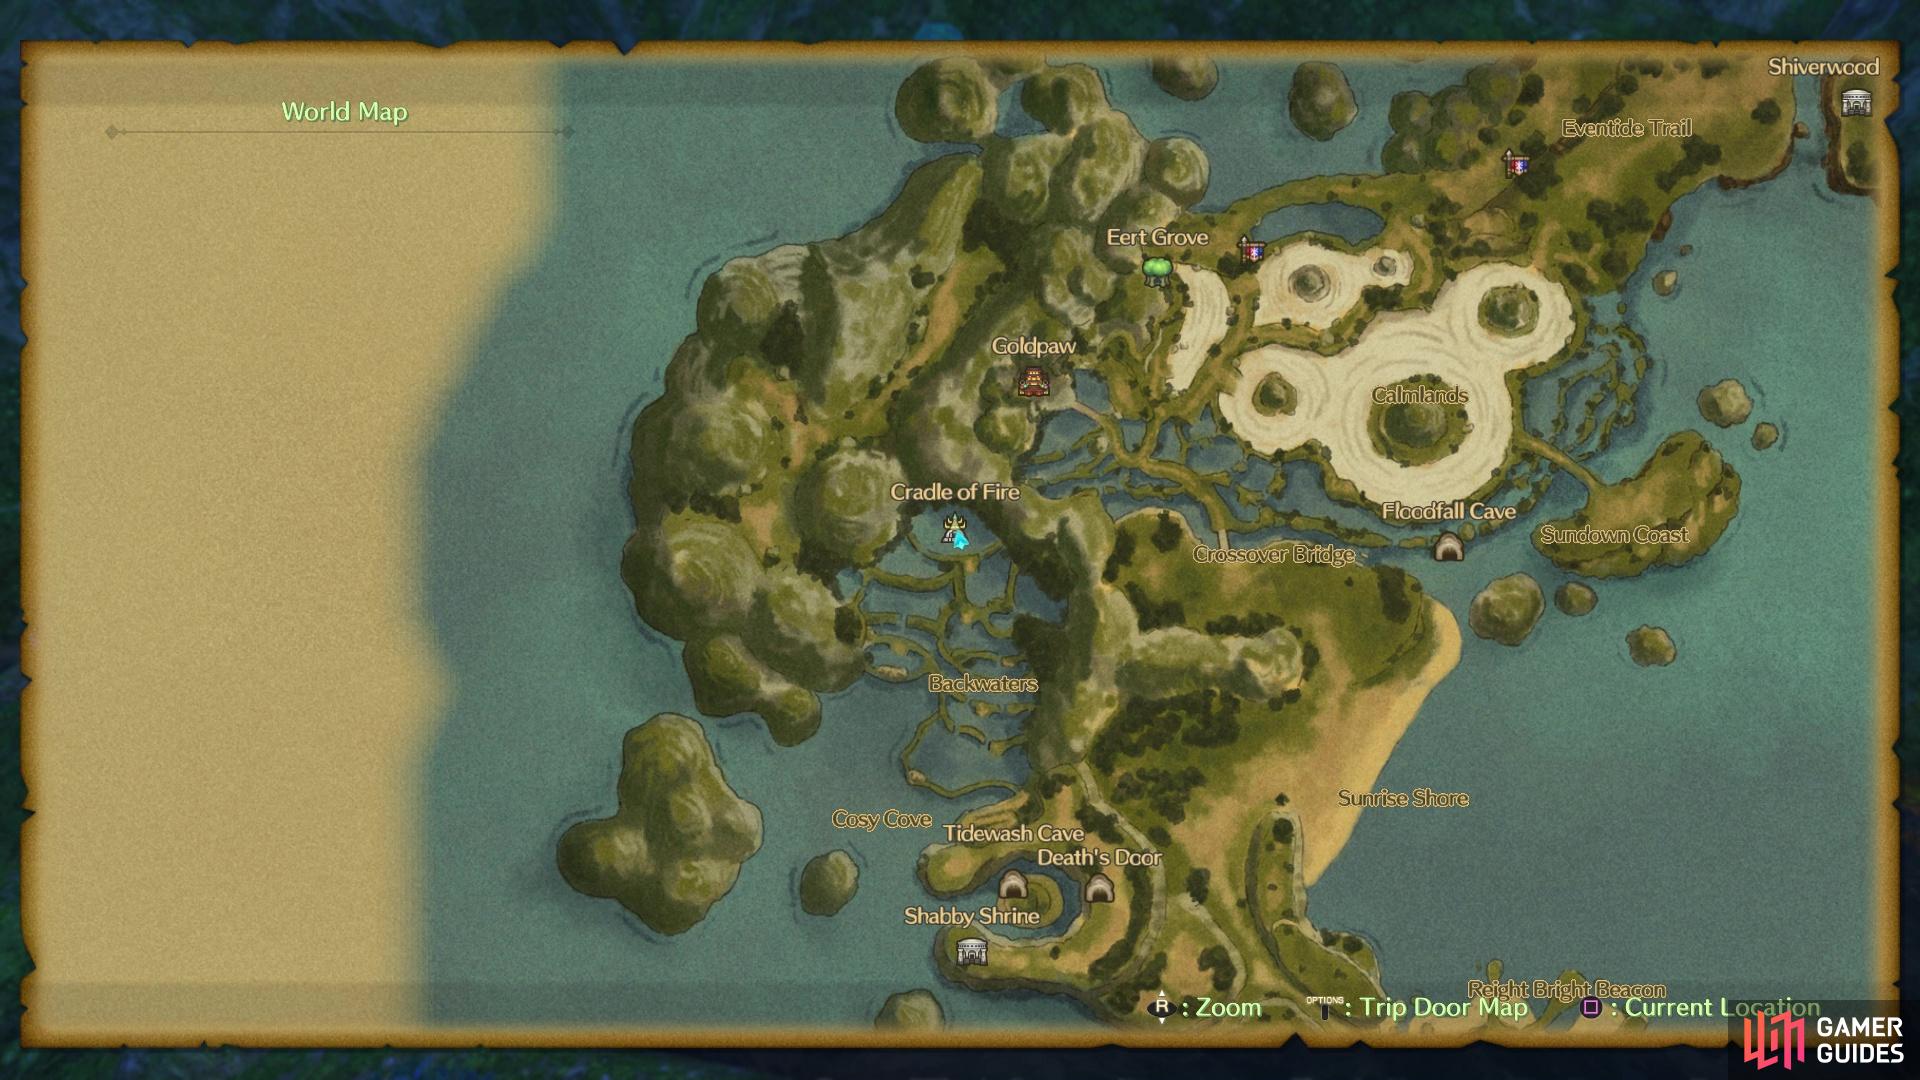 The location of the Cradle of Fire for Longfang